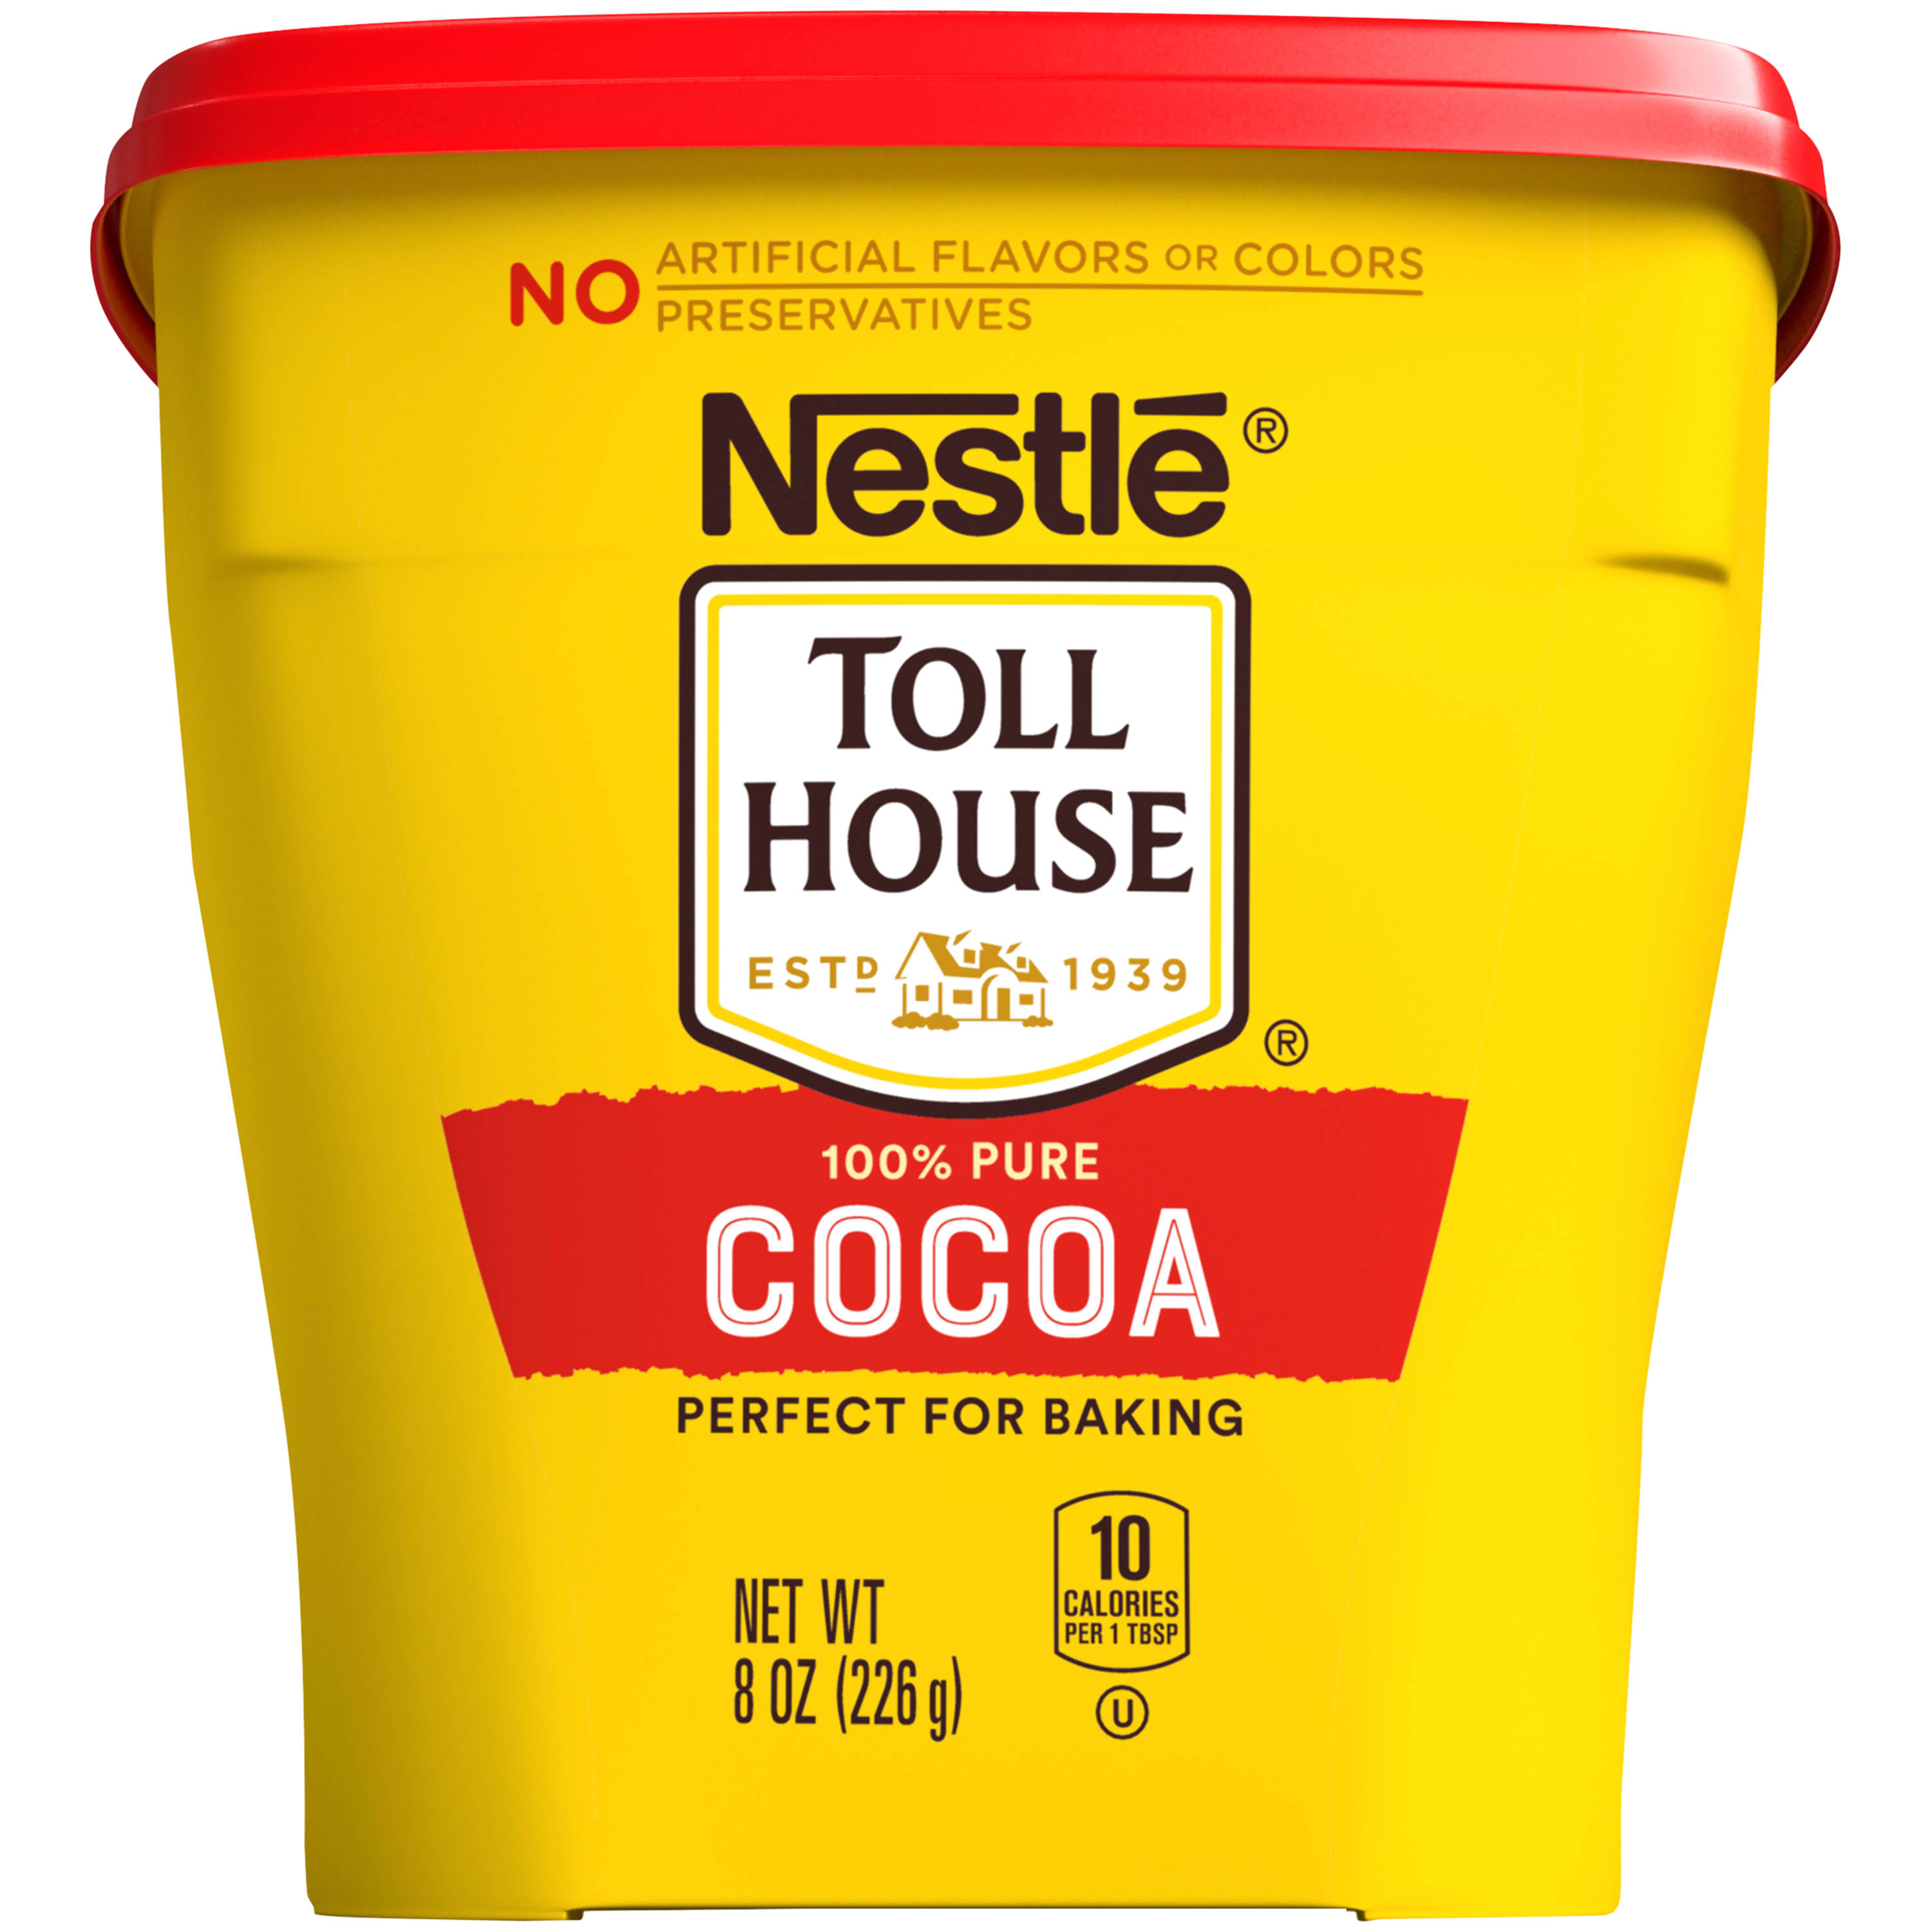 Nestle Toll House 100% Pure Cocoa, Deep Chocolate Flavor Poweder, 8 oz Box - image 1 of 10